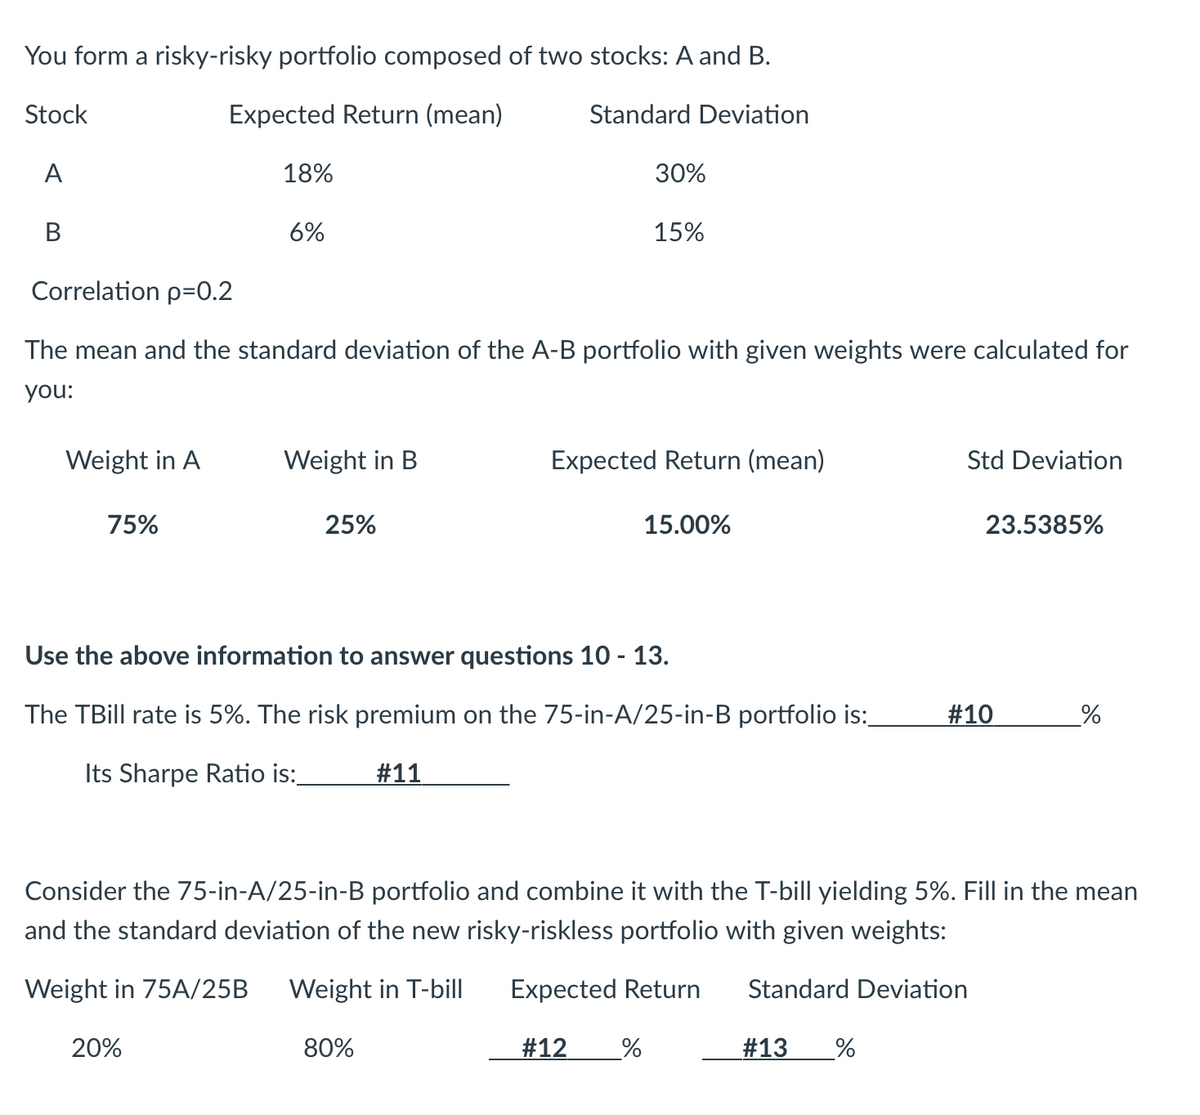 You form a risky-risky portfolio composed of two stocks: A and B.
Stock
Expected Return (mean)
Standard Deviation
A
B
Weight in A
75%
18%
6%
Correlation p=0.2
The mean and the standard deviation of the A-B portfolio with given weights were calculated for
you:
20%
Weight in B
25%
30%
15%
80%
Expected Return (mean)
Use the above information to answer questions 10 - 13.
The TBill rate is 5%. The risk premium on the 75-in-A/25-in-B portfolio is:
Its Sharpe Ratio is:_
#11
15.00%
Std Deviation
#13 %
23.5385%
Consider the 75-in-A/25-in-B portfolio and combine it with the T-bill yielding 5%. Fill in the mean
and the standard deviation of the new risky-riskless portfolio with given weights:
Weight in 75A/25B Weight in T-bill
Expected Return
Standard Deviation
#12 %
#10
%